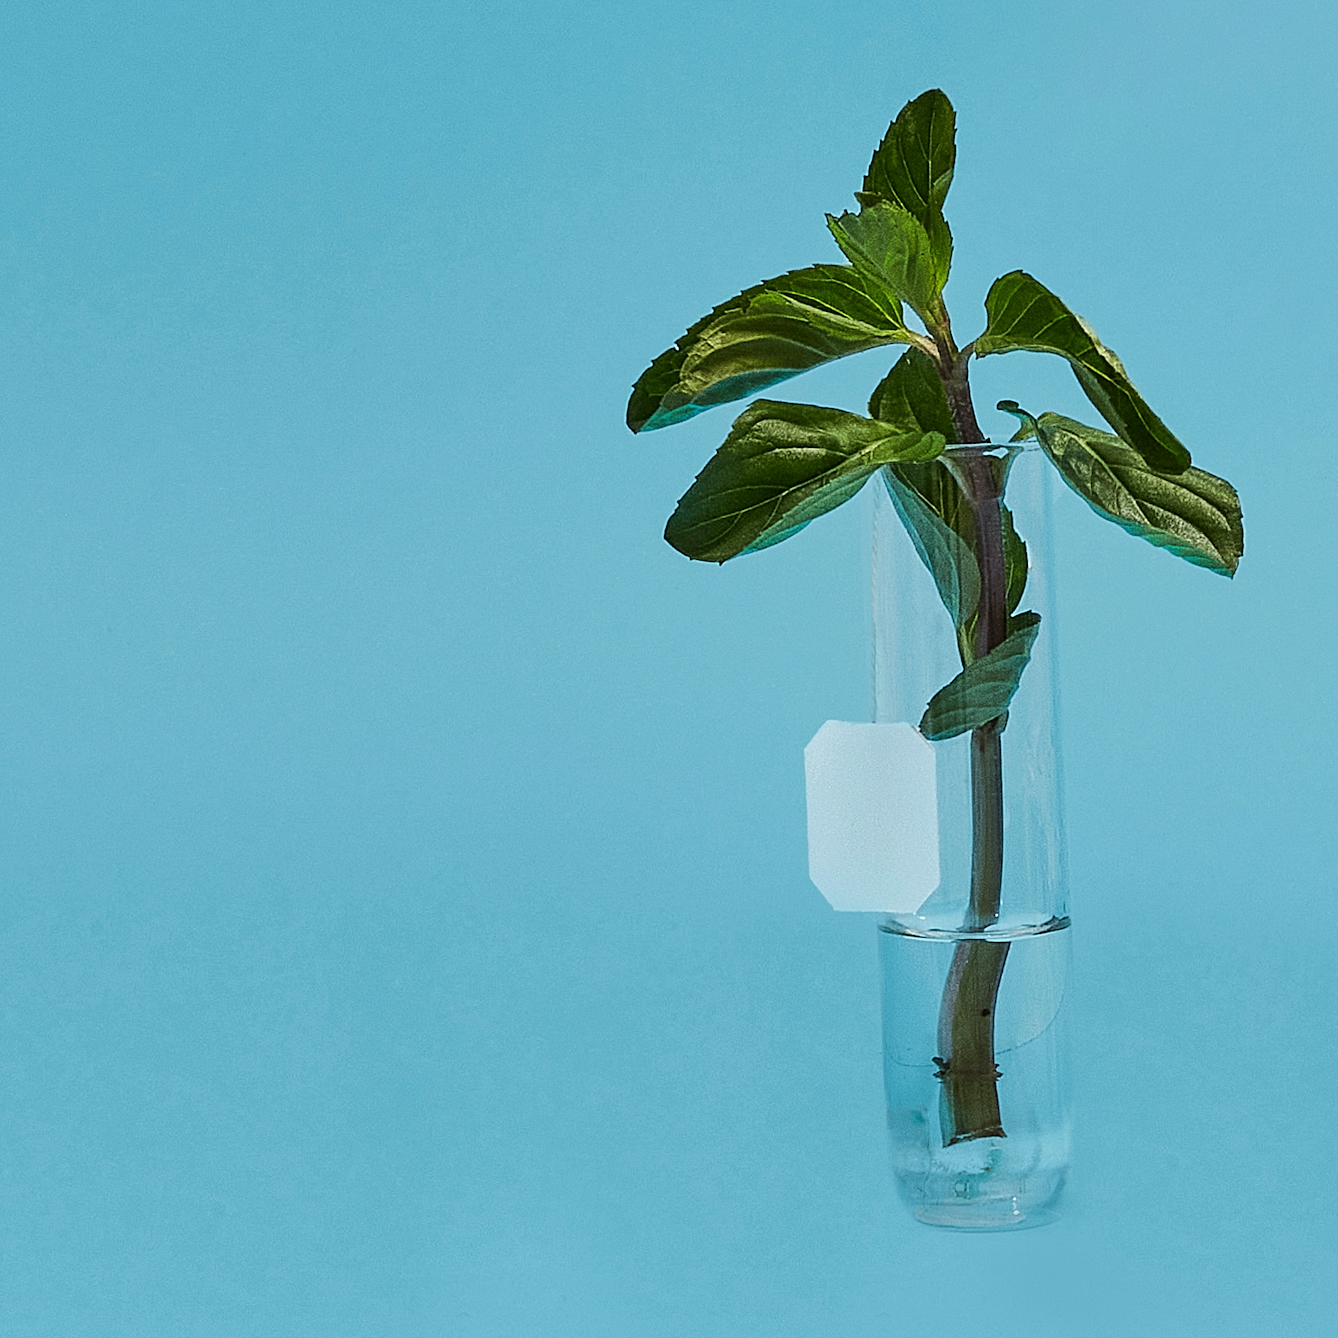 Photograph of a glass test tube on a bright blue background. The test tube has the herb mint in it, its stem in a small amount of water its leaves and flowers rising out of the top. There is also a tea bag string and paper tag hanging down.